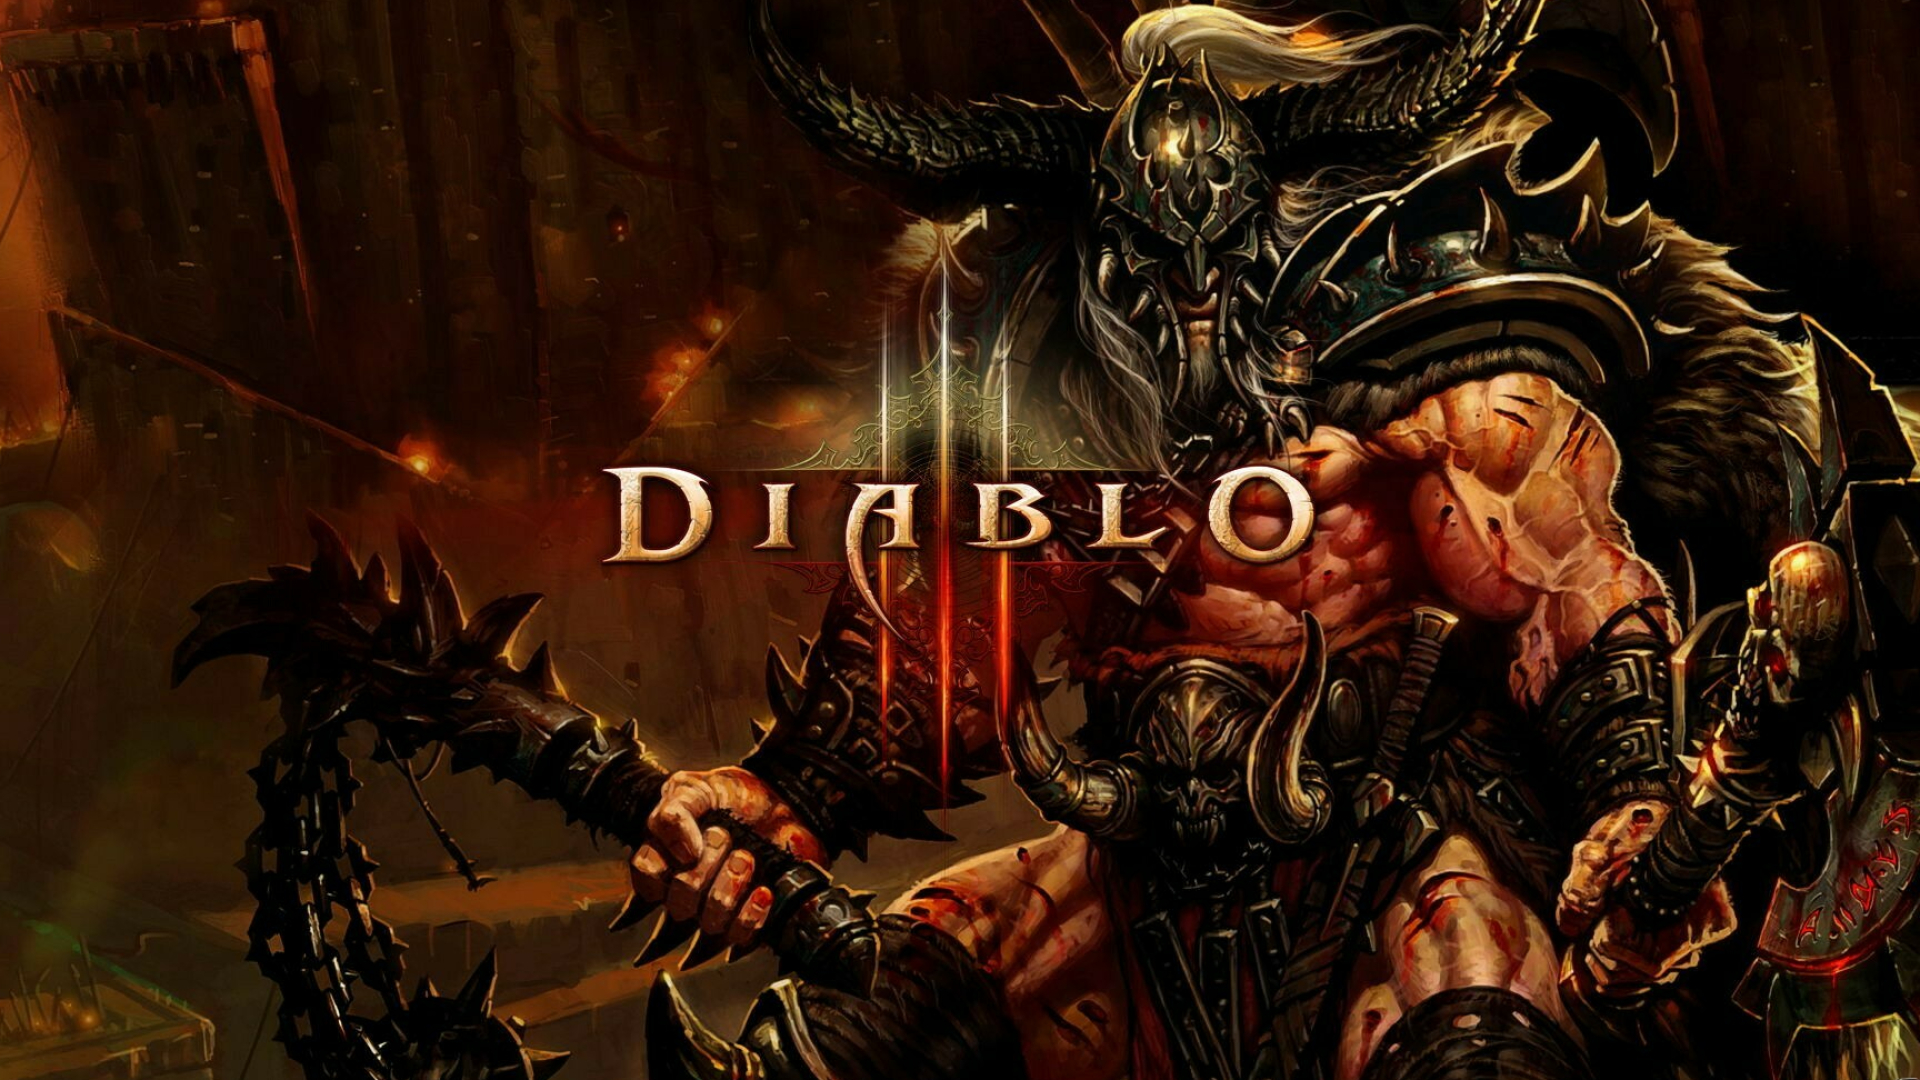 Diablo: Set in the fictional Kingdom of Khanduras in the mortal realm, the player controls a lone hero battling to rid the world of the Lord of Terror. 1920x1080 Full HD Wallpaper.